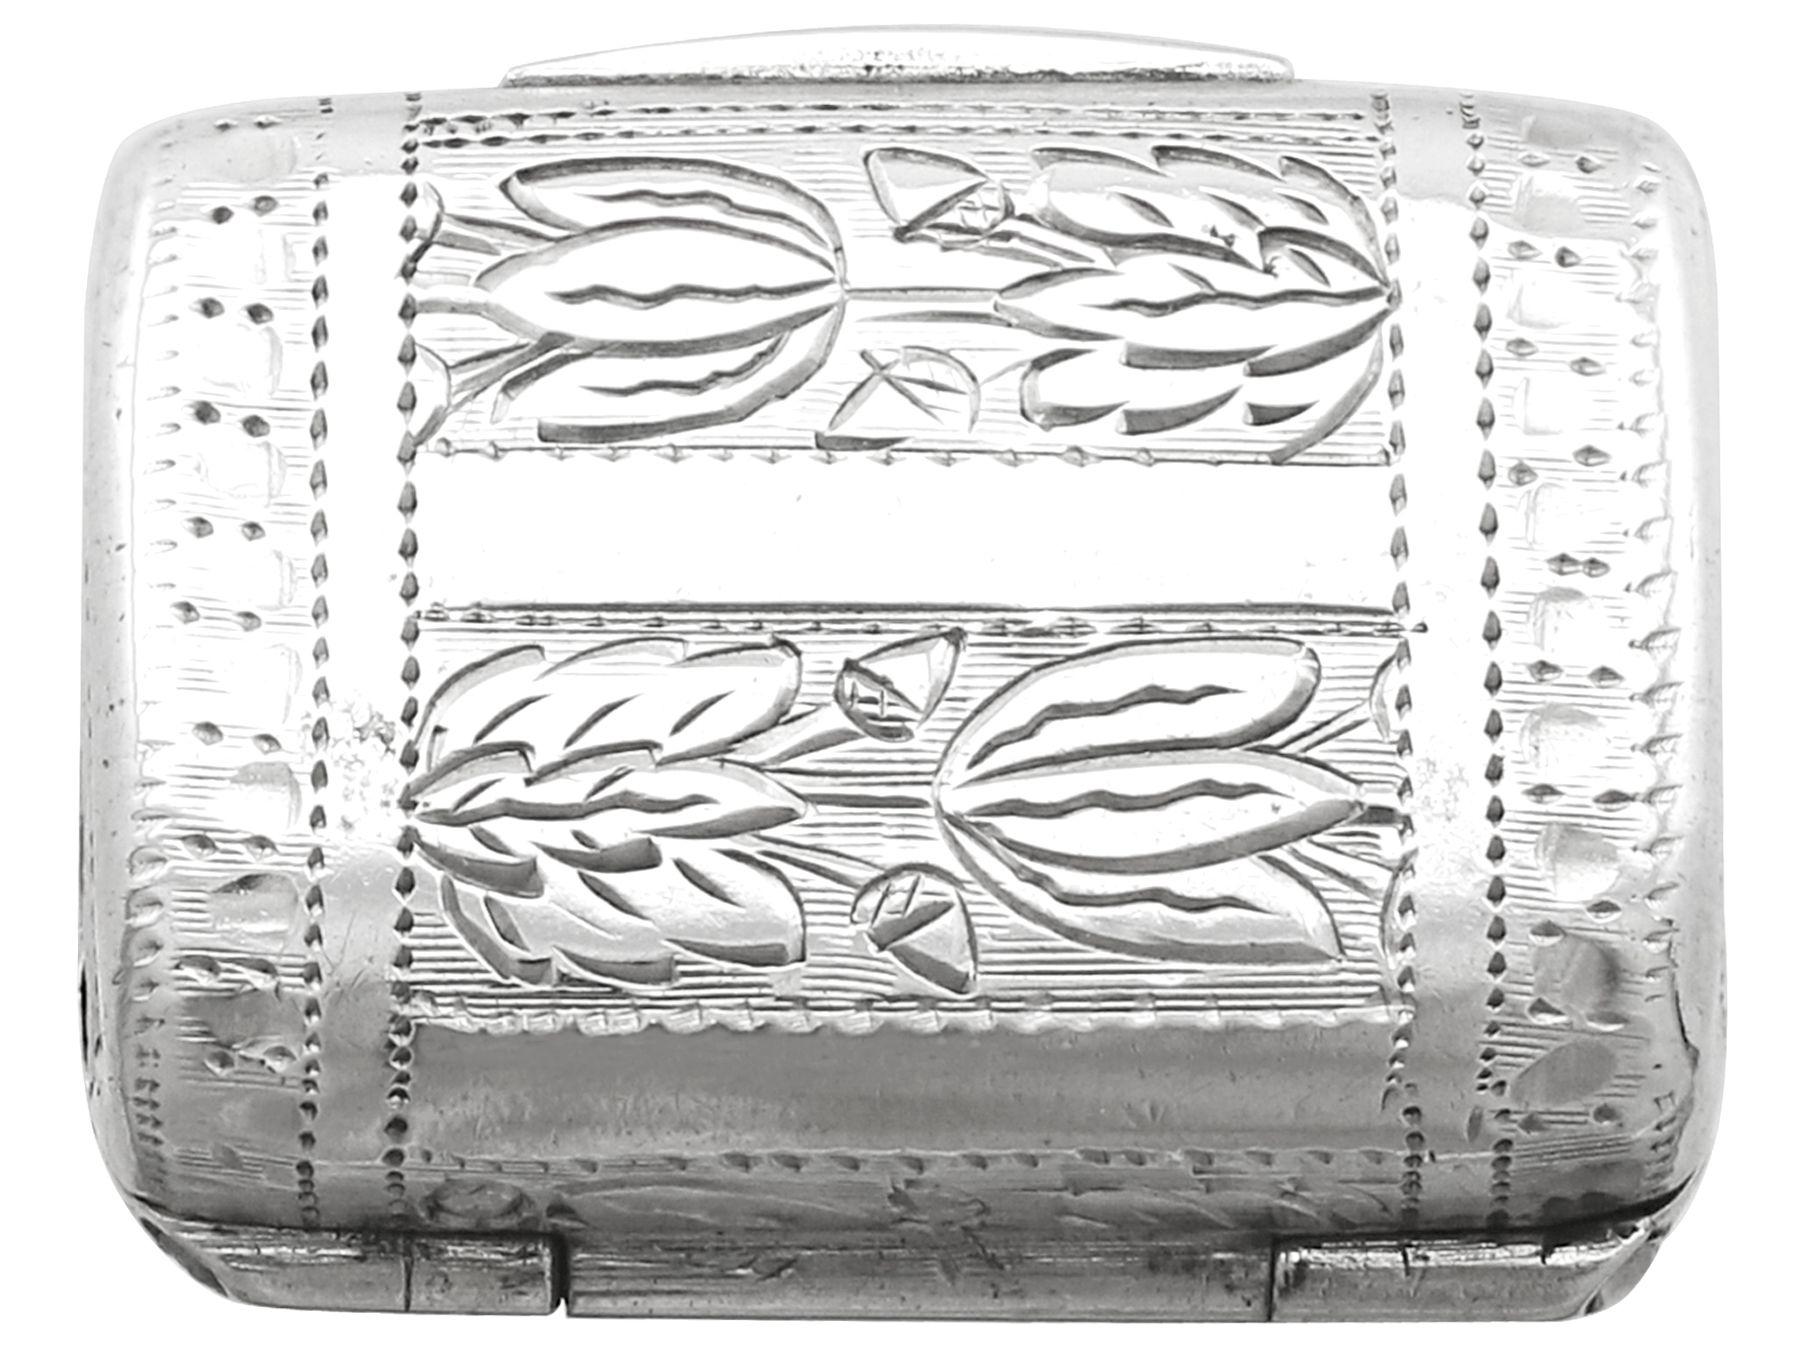 A fine and impressive antique Georgian English sterling silver vinaigrette in the form of a purse, an addition to our silver boxes collection

This antique Georgian silver vinaigrette has been realistically modelled in the form of a purse.

The